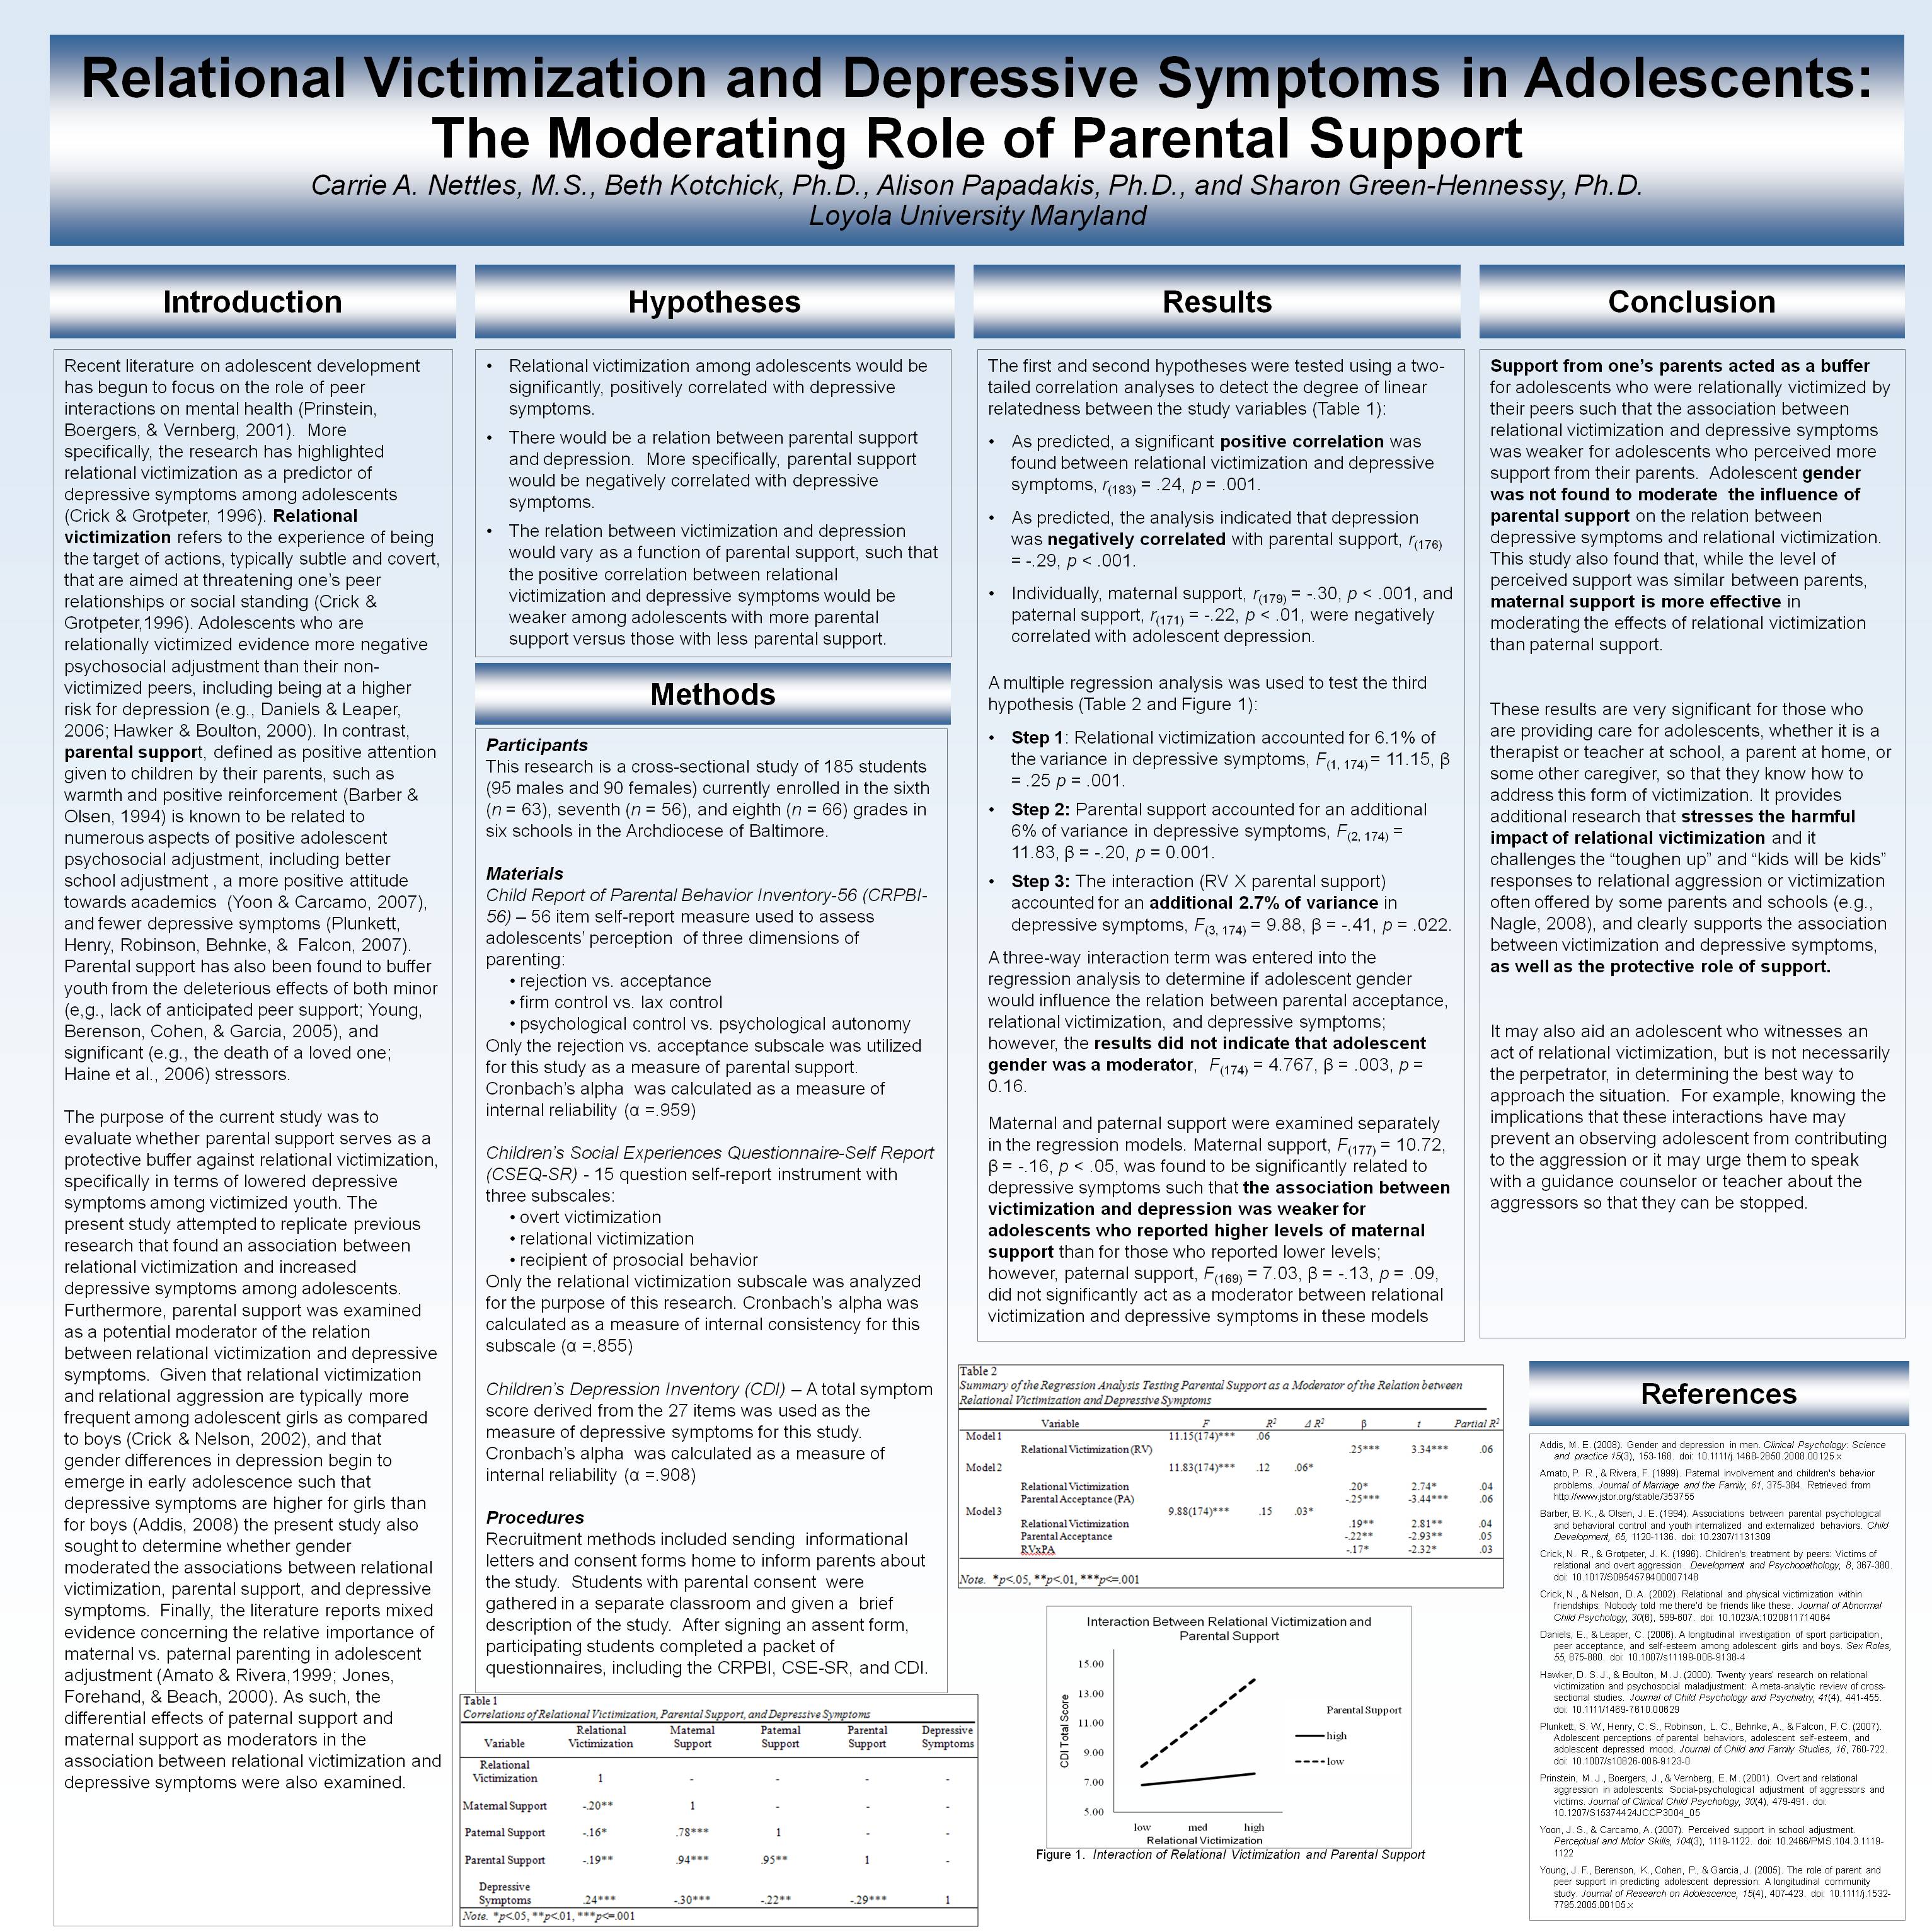 Poster image: Relational Victimization and Depressive Symptoms in Adolescents:  The Moderating Role of Parental Support